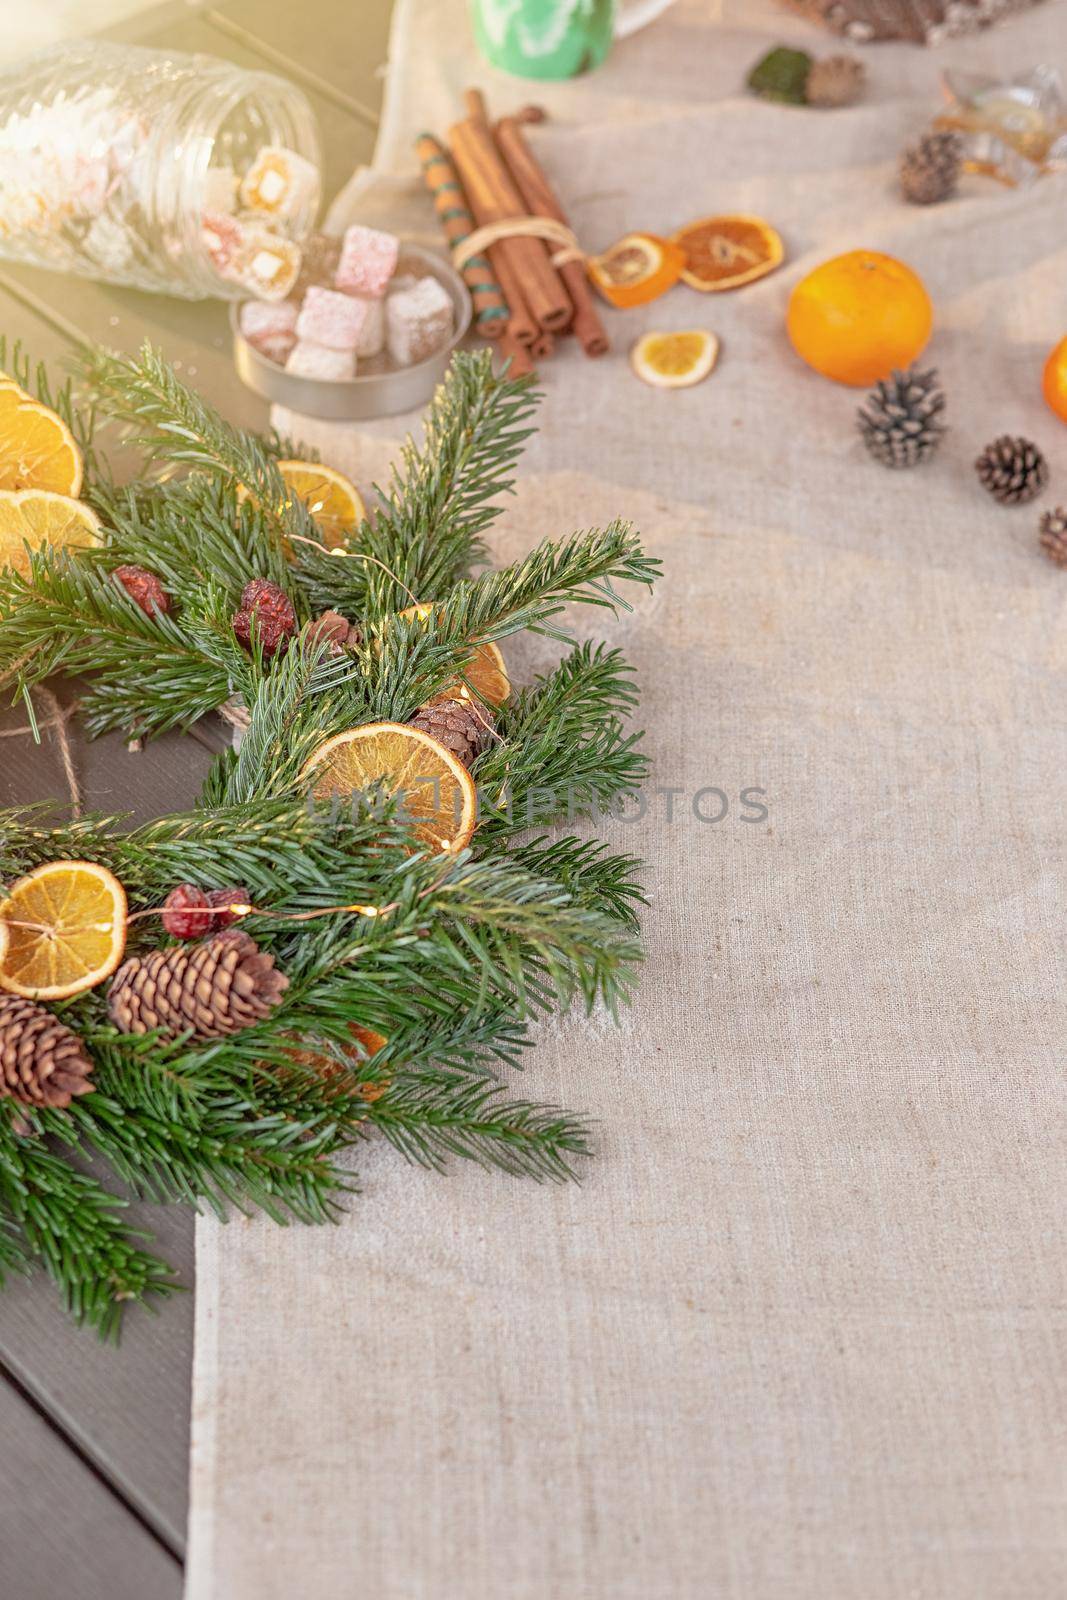 Rustic Christmas table with natural spruce wreath, dried oranges, fresh tangerines, pine cones, cinnamon sprigs and sweets on a fabric tablecloth. Copy space. Vertical